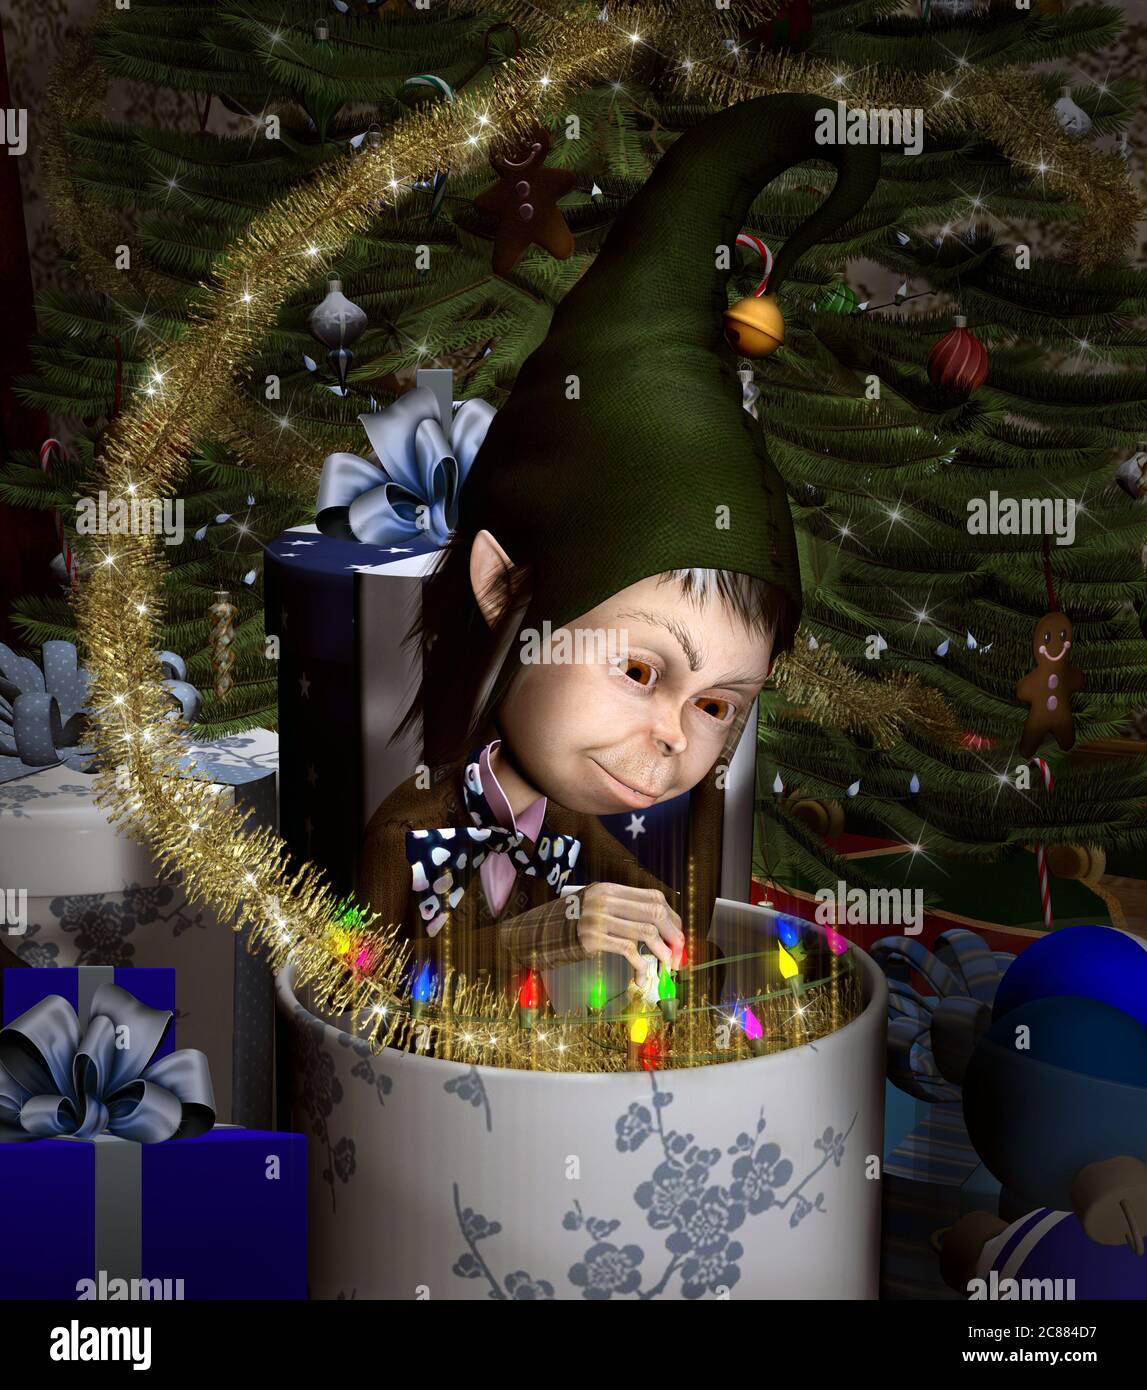 Funny elf in a gift box with lights and Christmas decorations all around Stock Photo